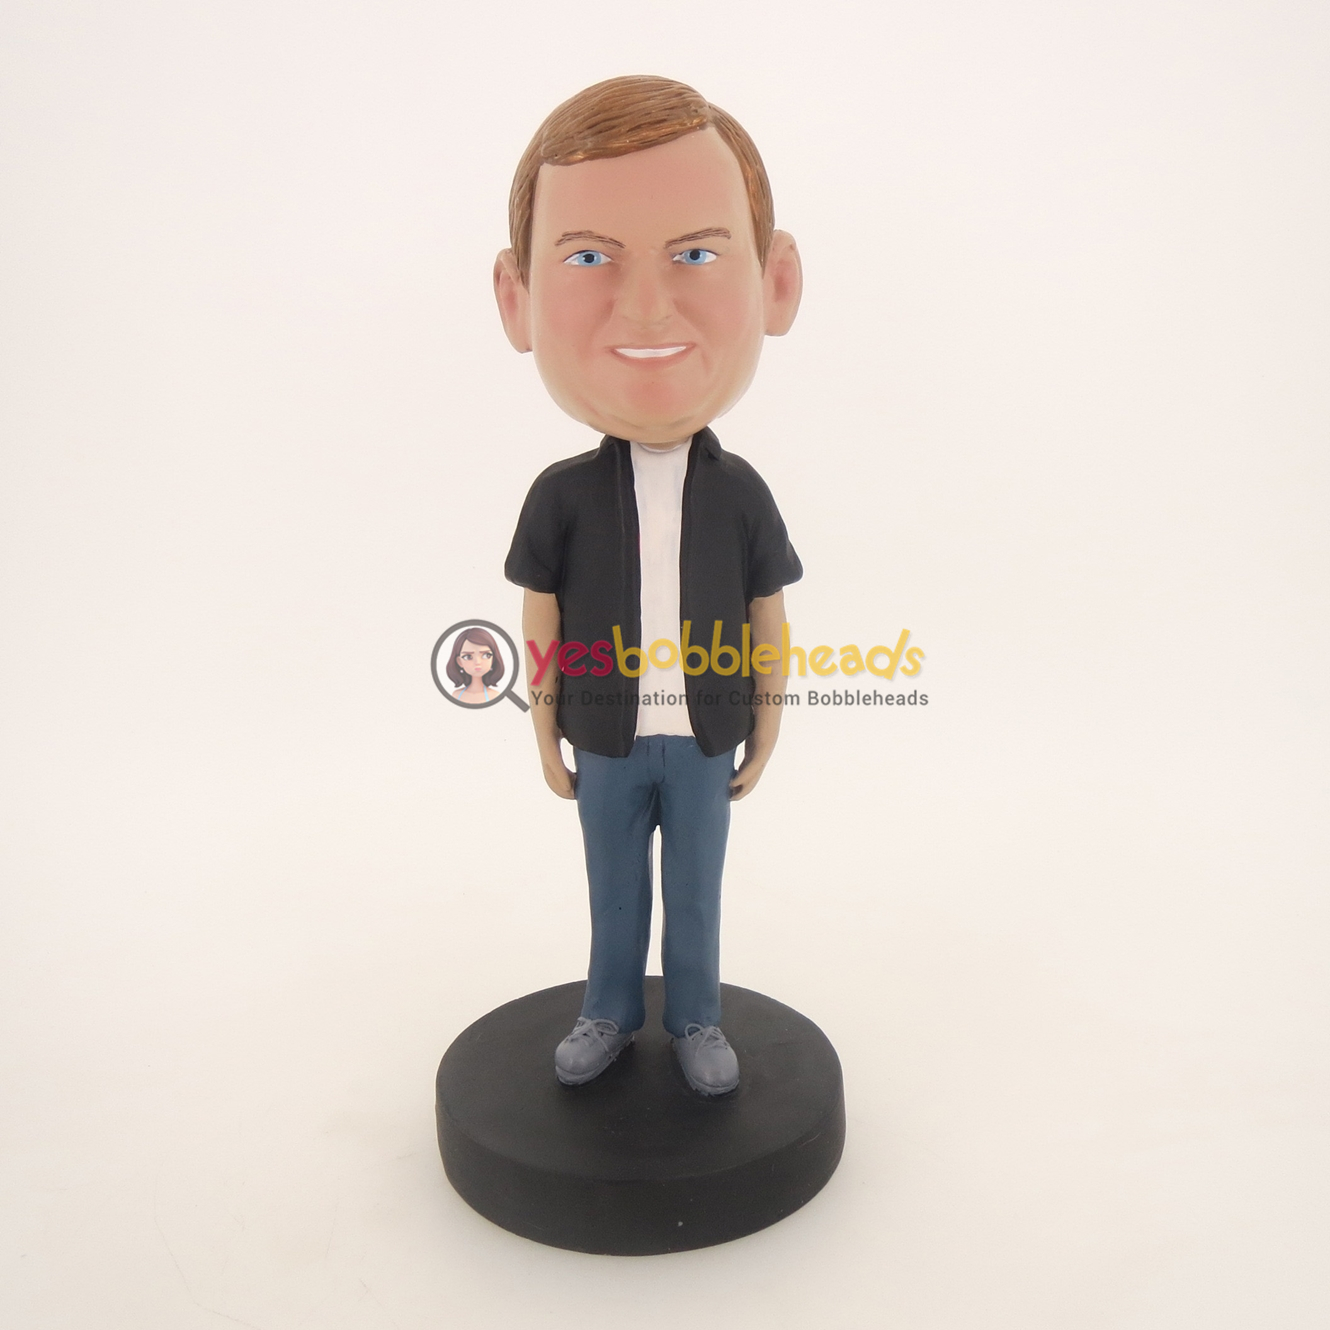 Picture of Custom Bobblehead Doll: Big Boy With Casual Style